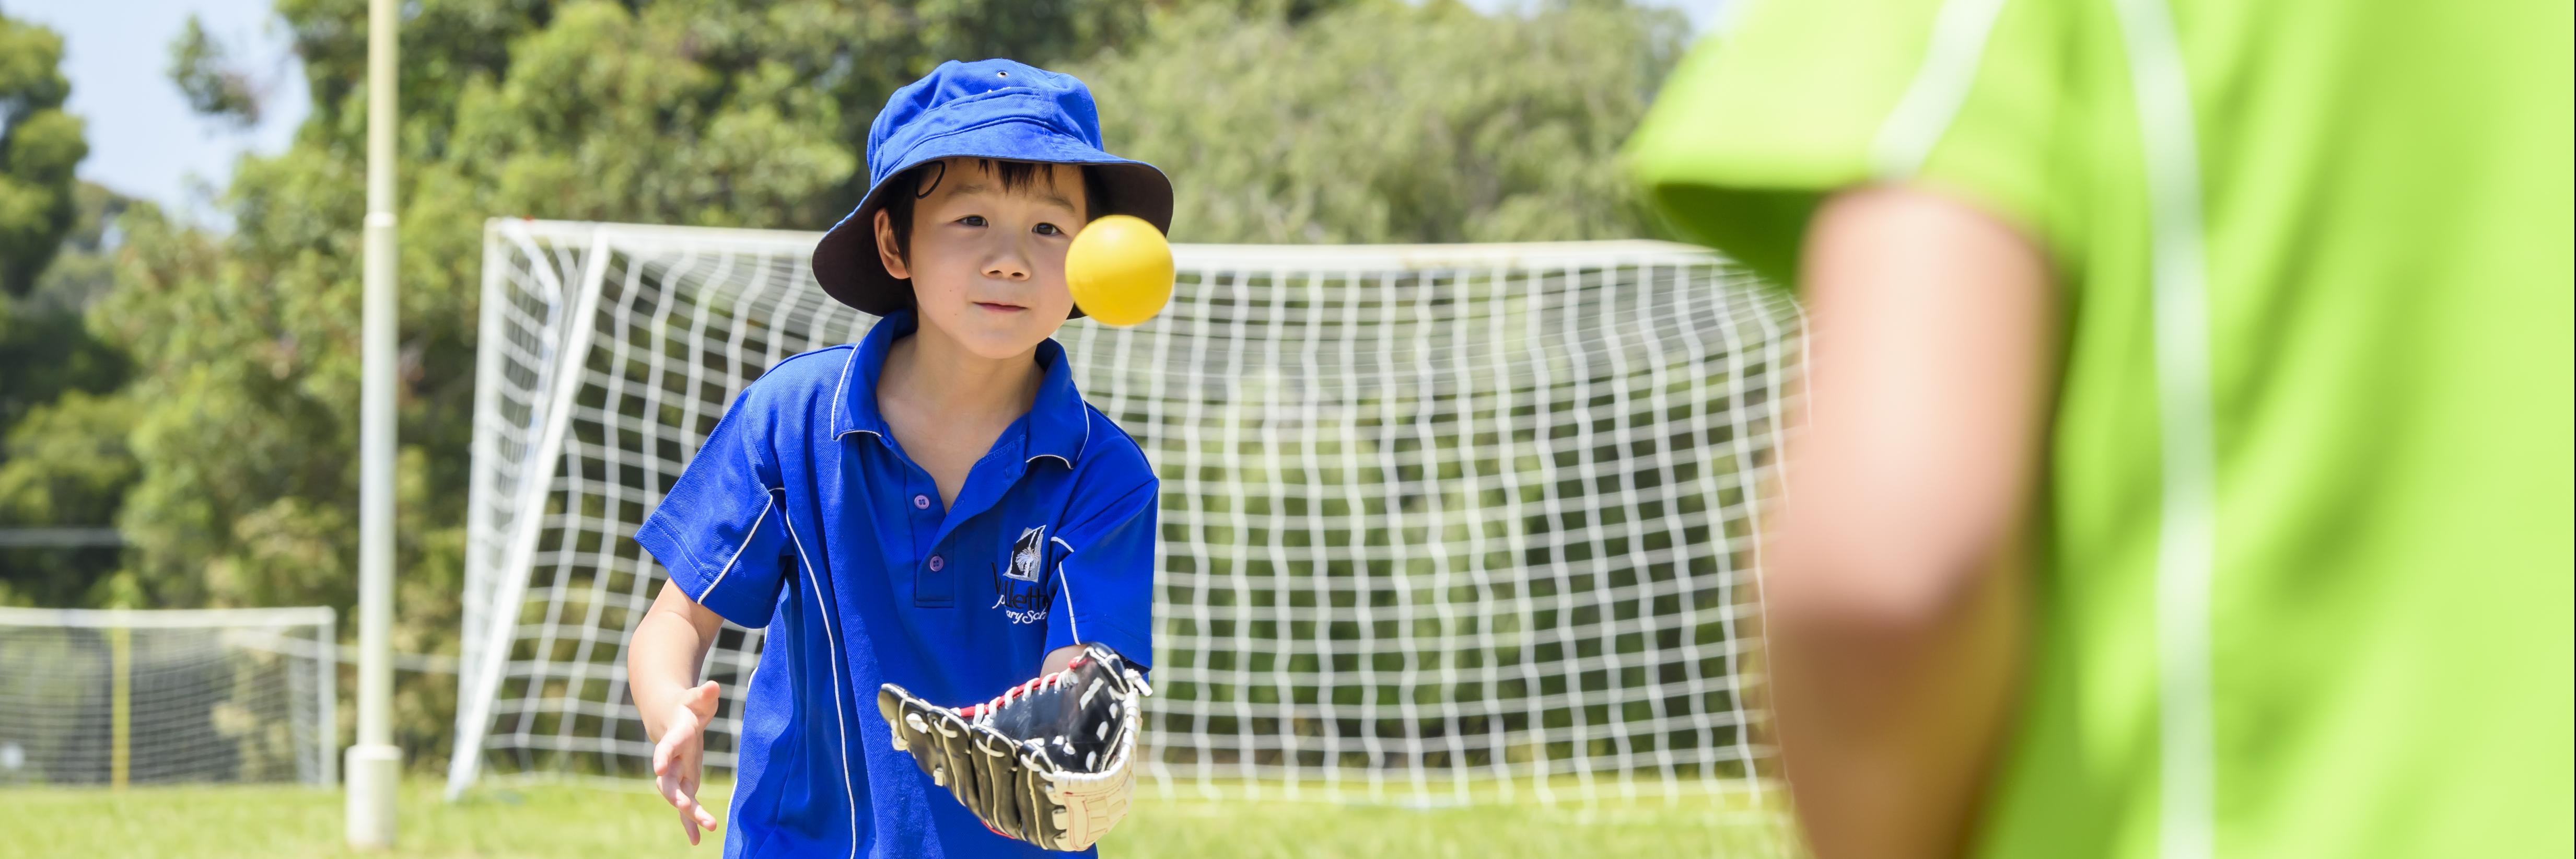 boy with a blue faction shirt and hat on looks towards a yellow tee ball as he tries to catch it in his glove. to the right of image is a boy with a green faction shirt on who had thrown him the ball